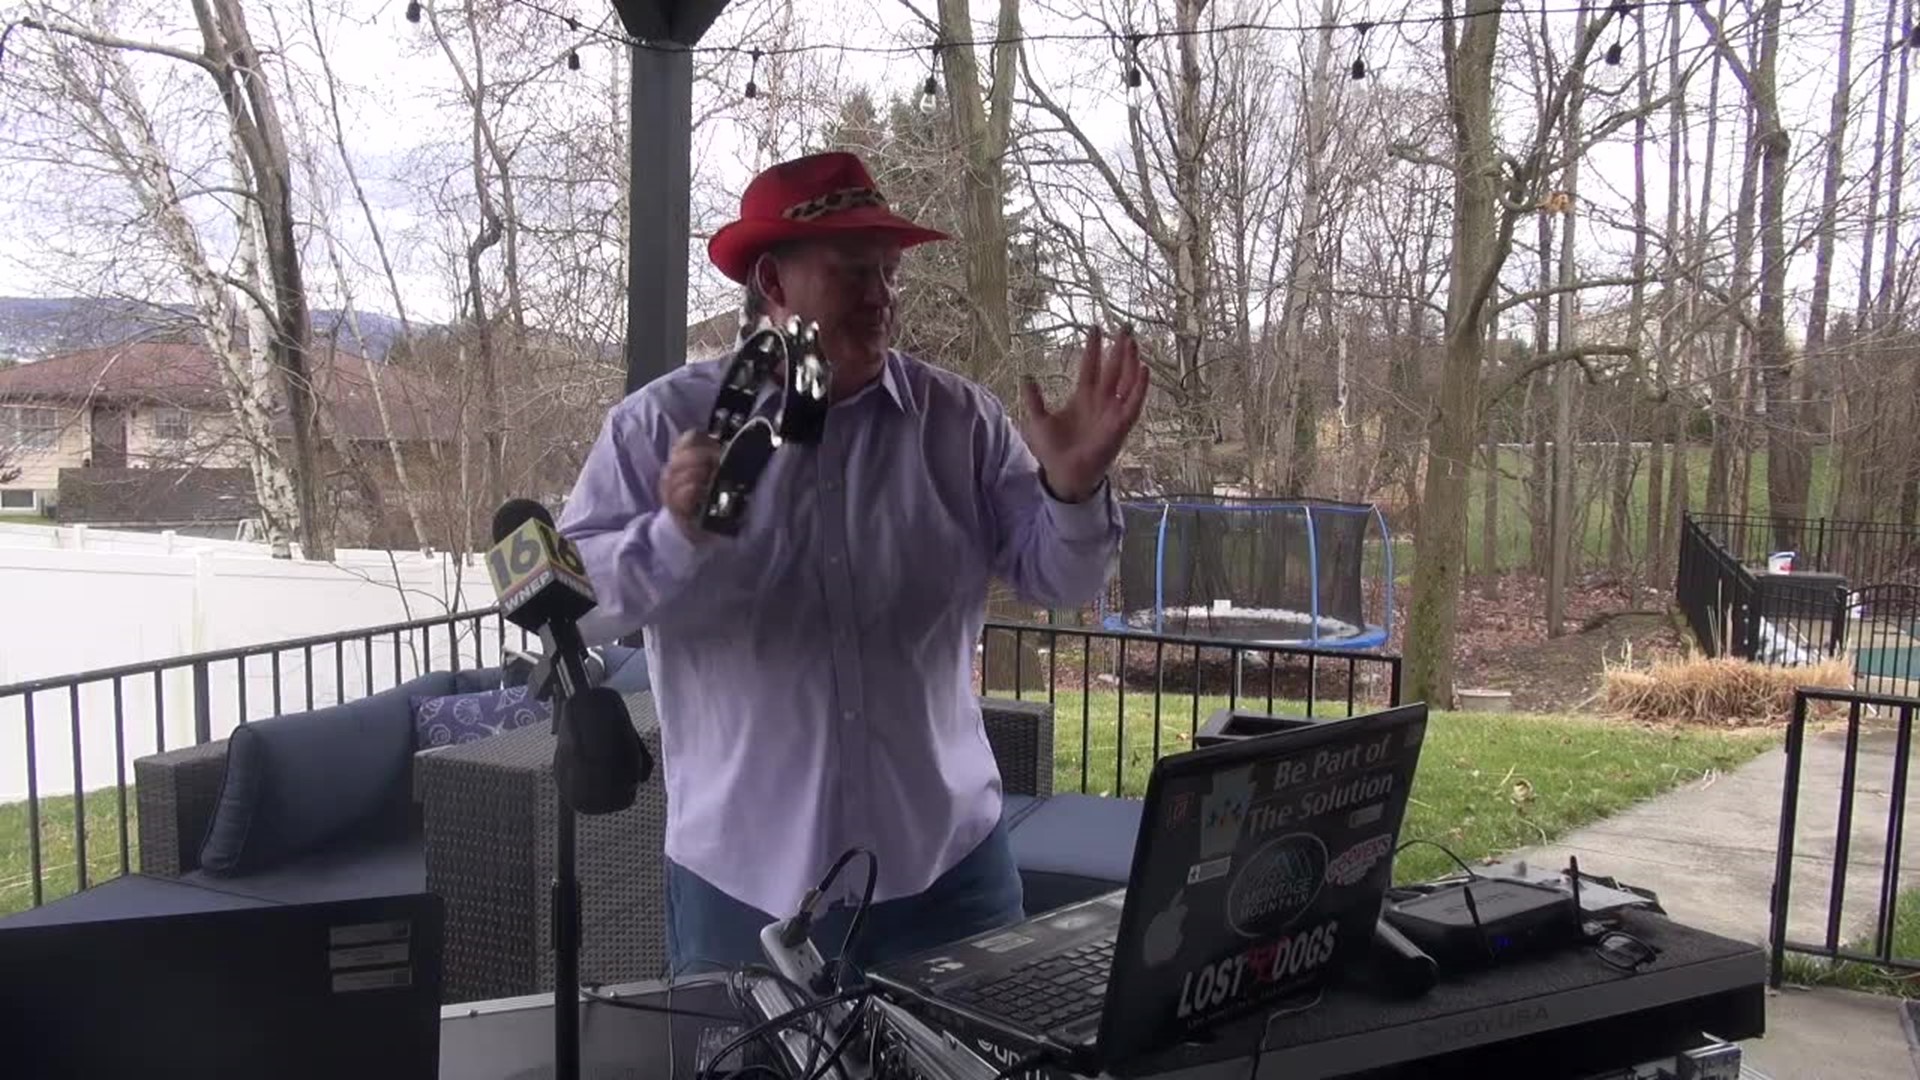 cranton's EJ the DJ is broadcasting on Facebook Live every day.